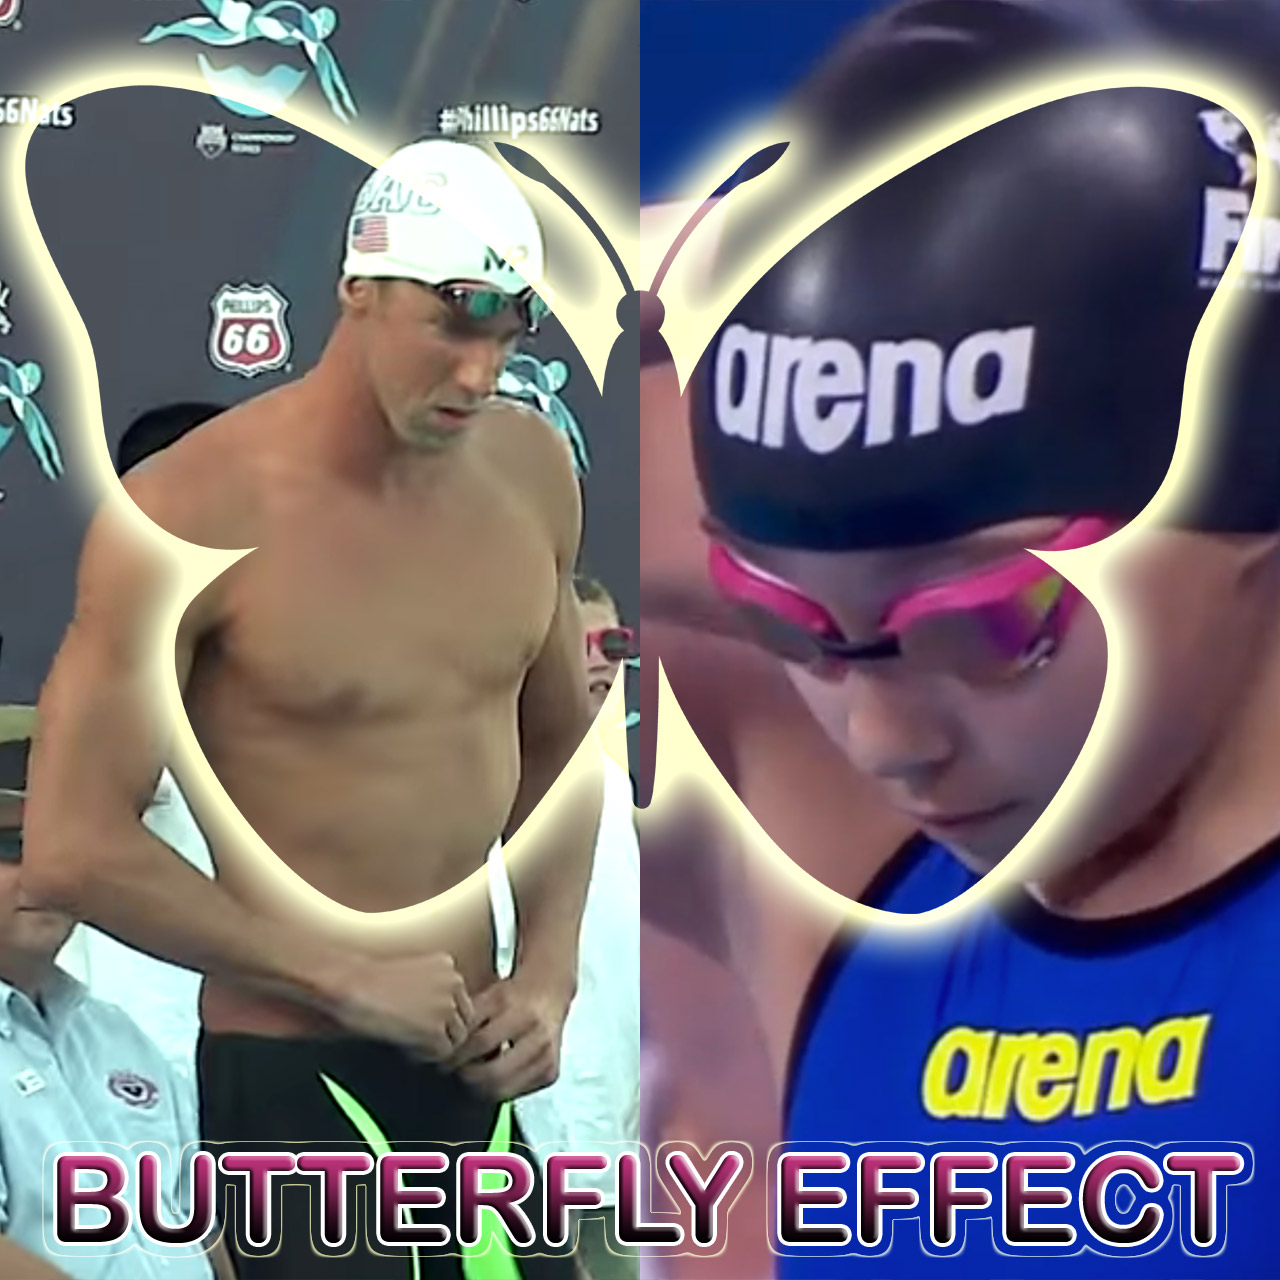 10-year-old Alzain Tareq and 30-year-old Michael Phelps demonstrate the butterfly effect